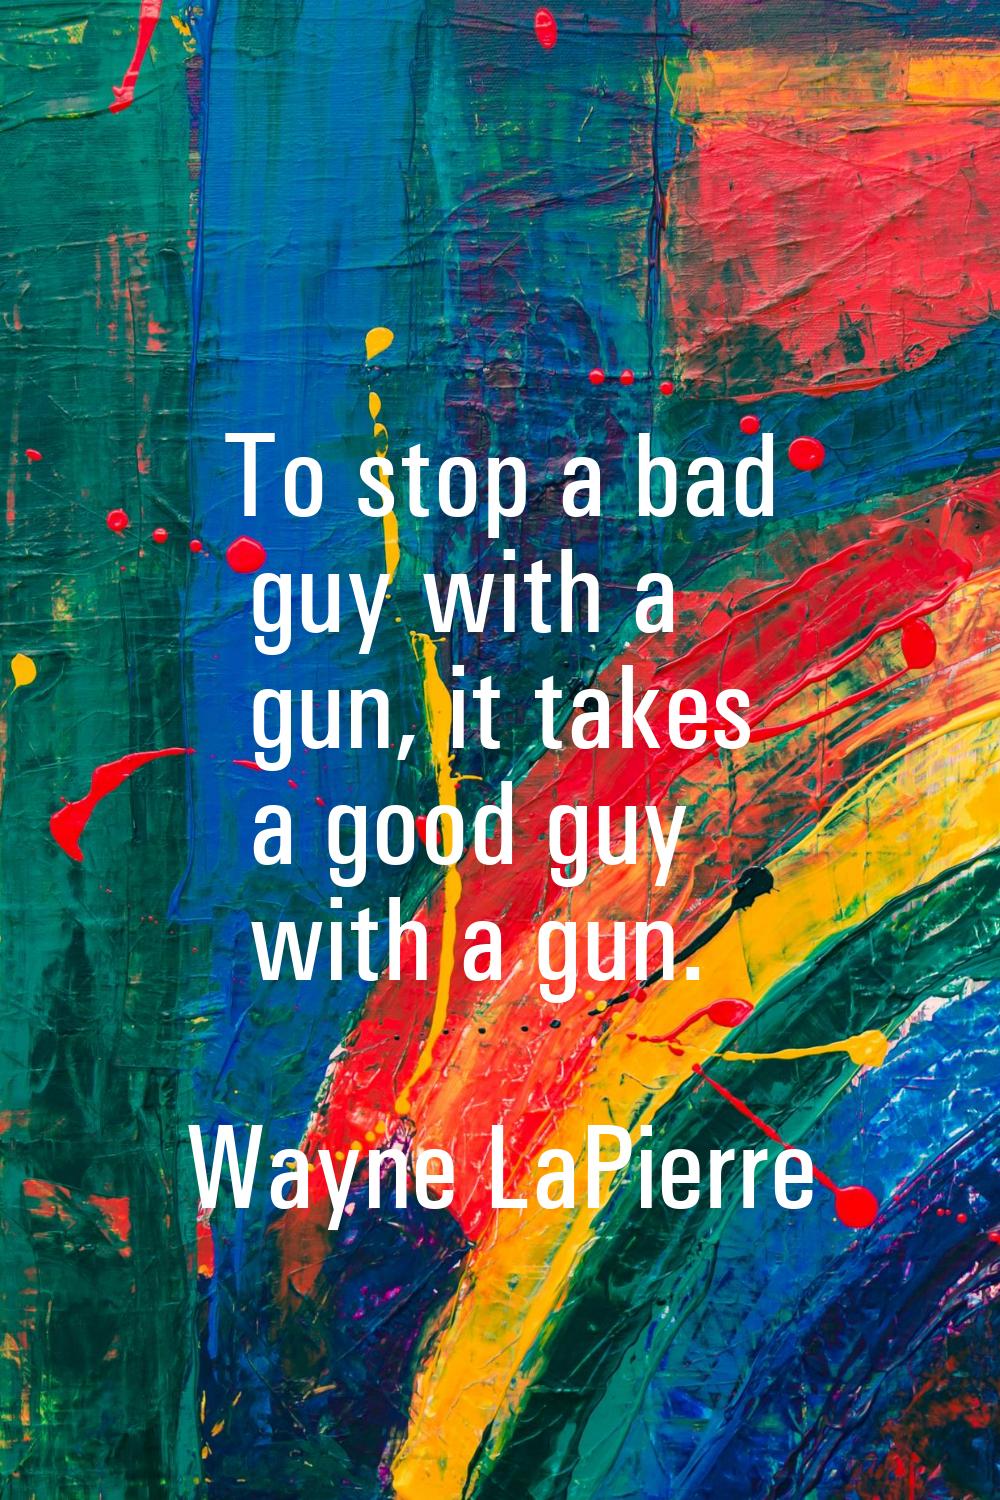 To stop a bad guy with a gun, it takes a good guy with a gun.